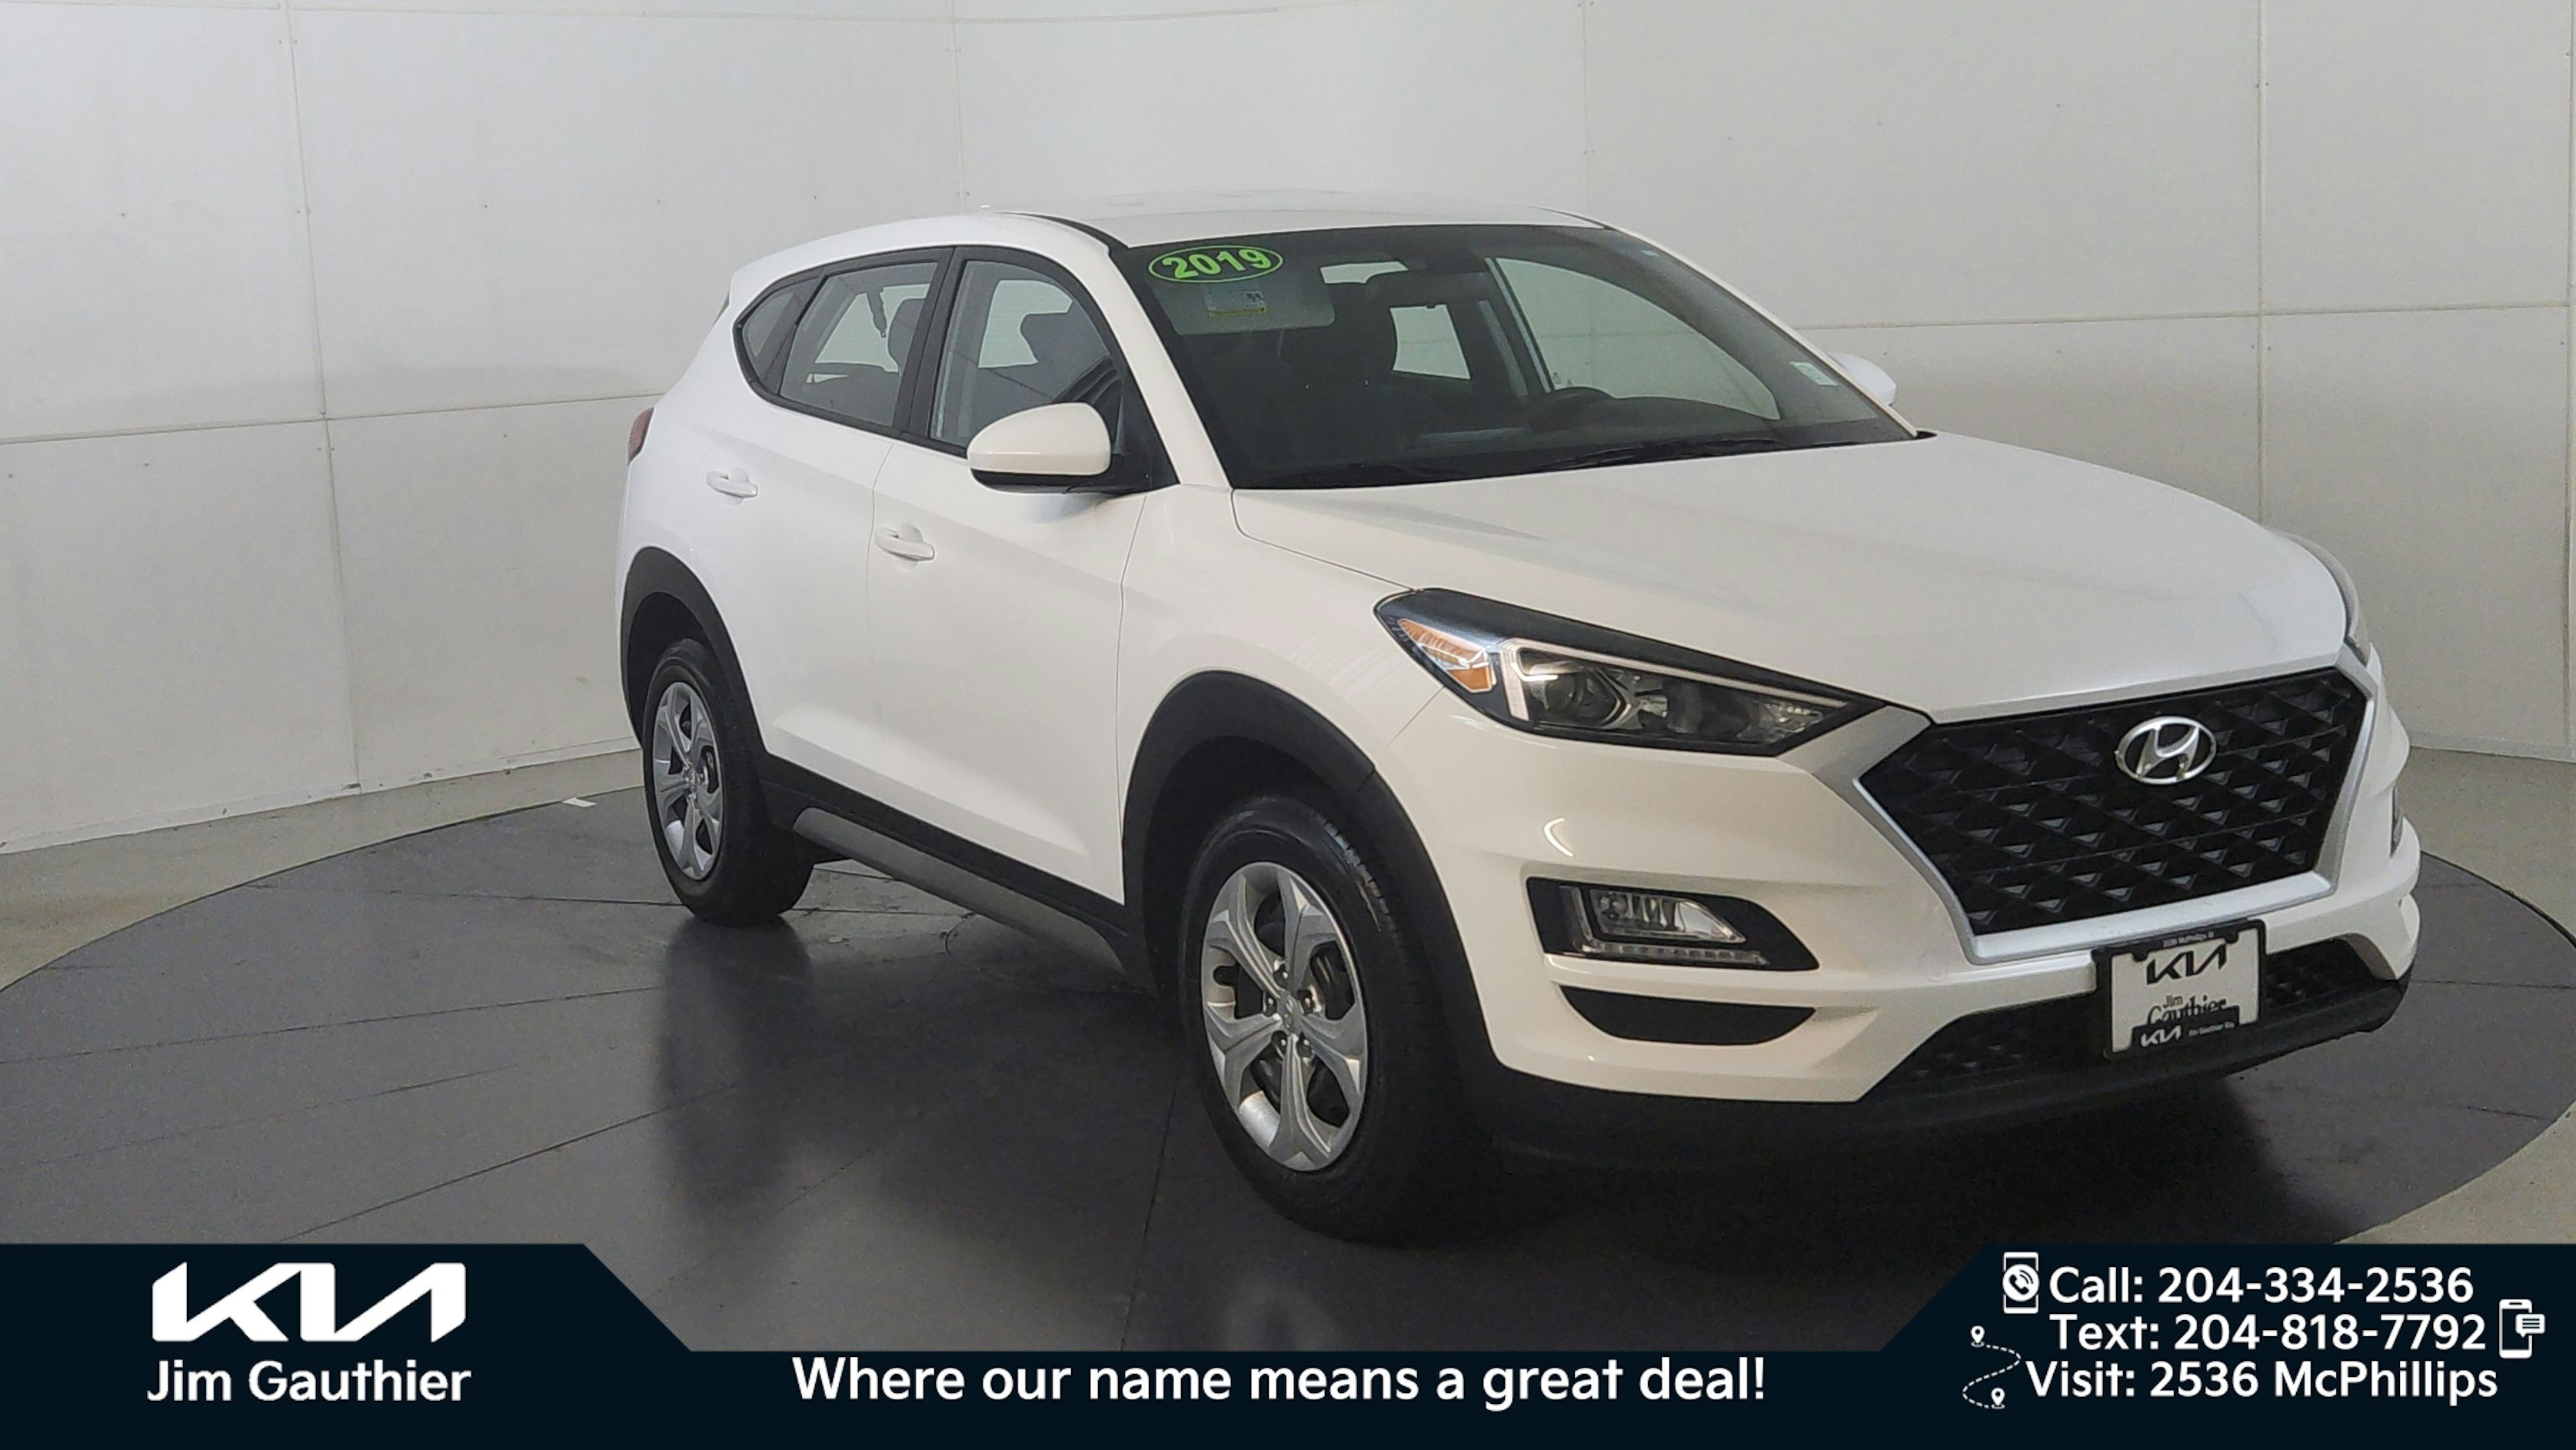 2019 Hyundai Tucson Essential FWD, Local Trade, Heated Front Seats